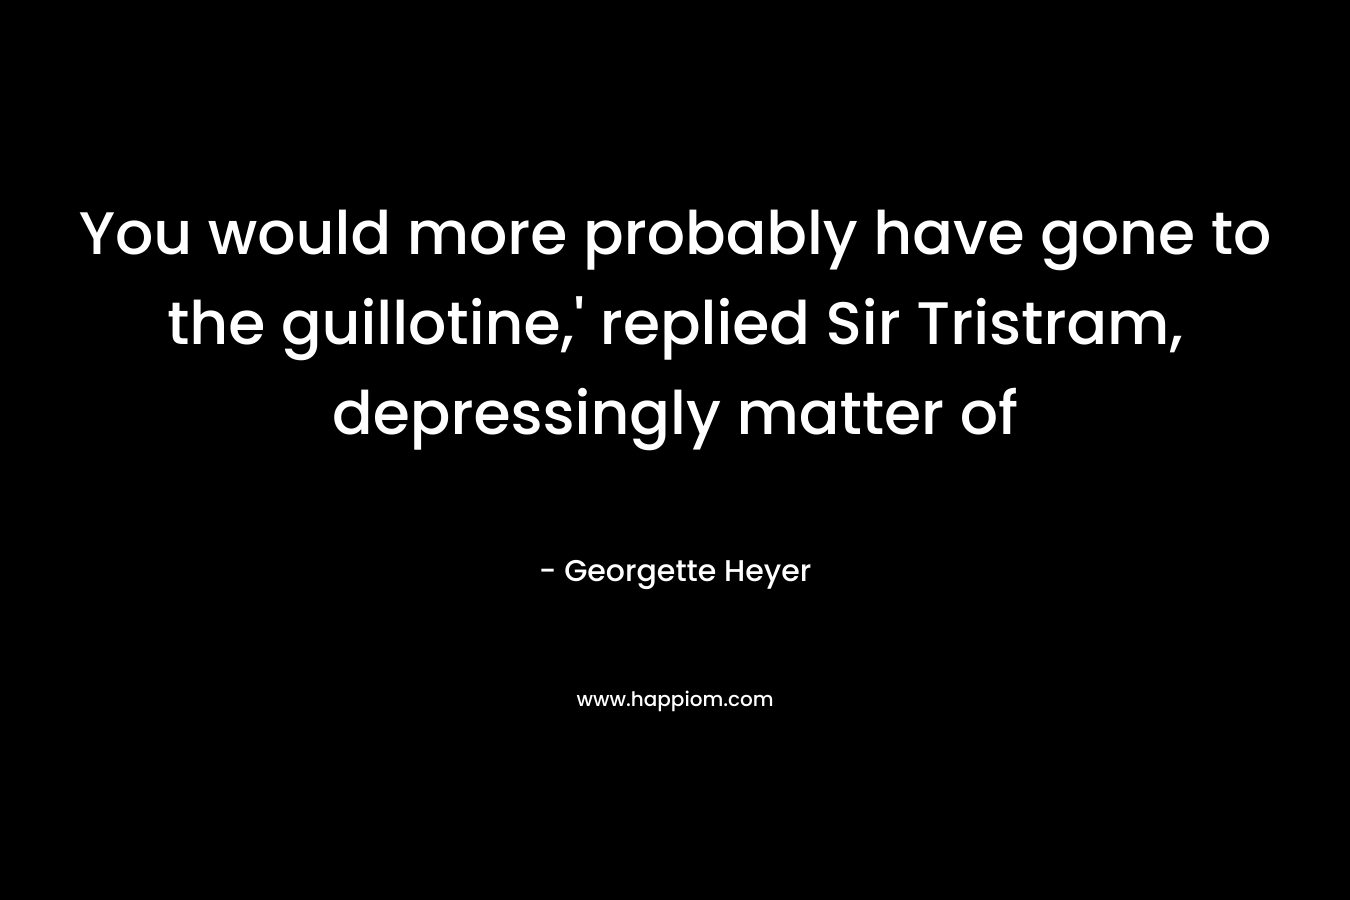 You would more probably have gone to the guillotine,’ replied Sir Tristram, depressingly matter of – Georgette Heyer